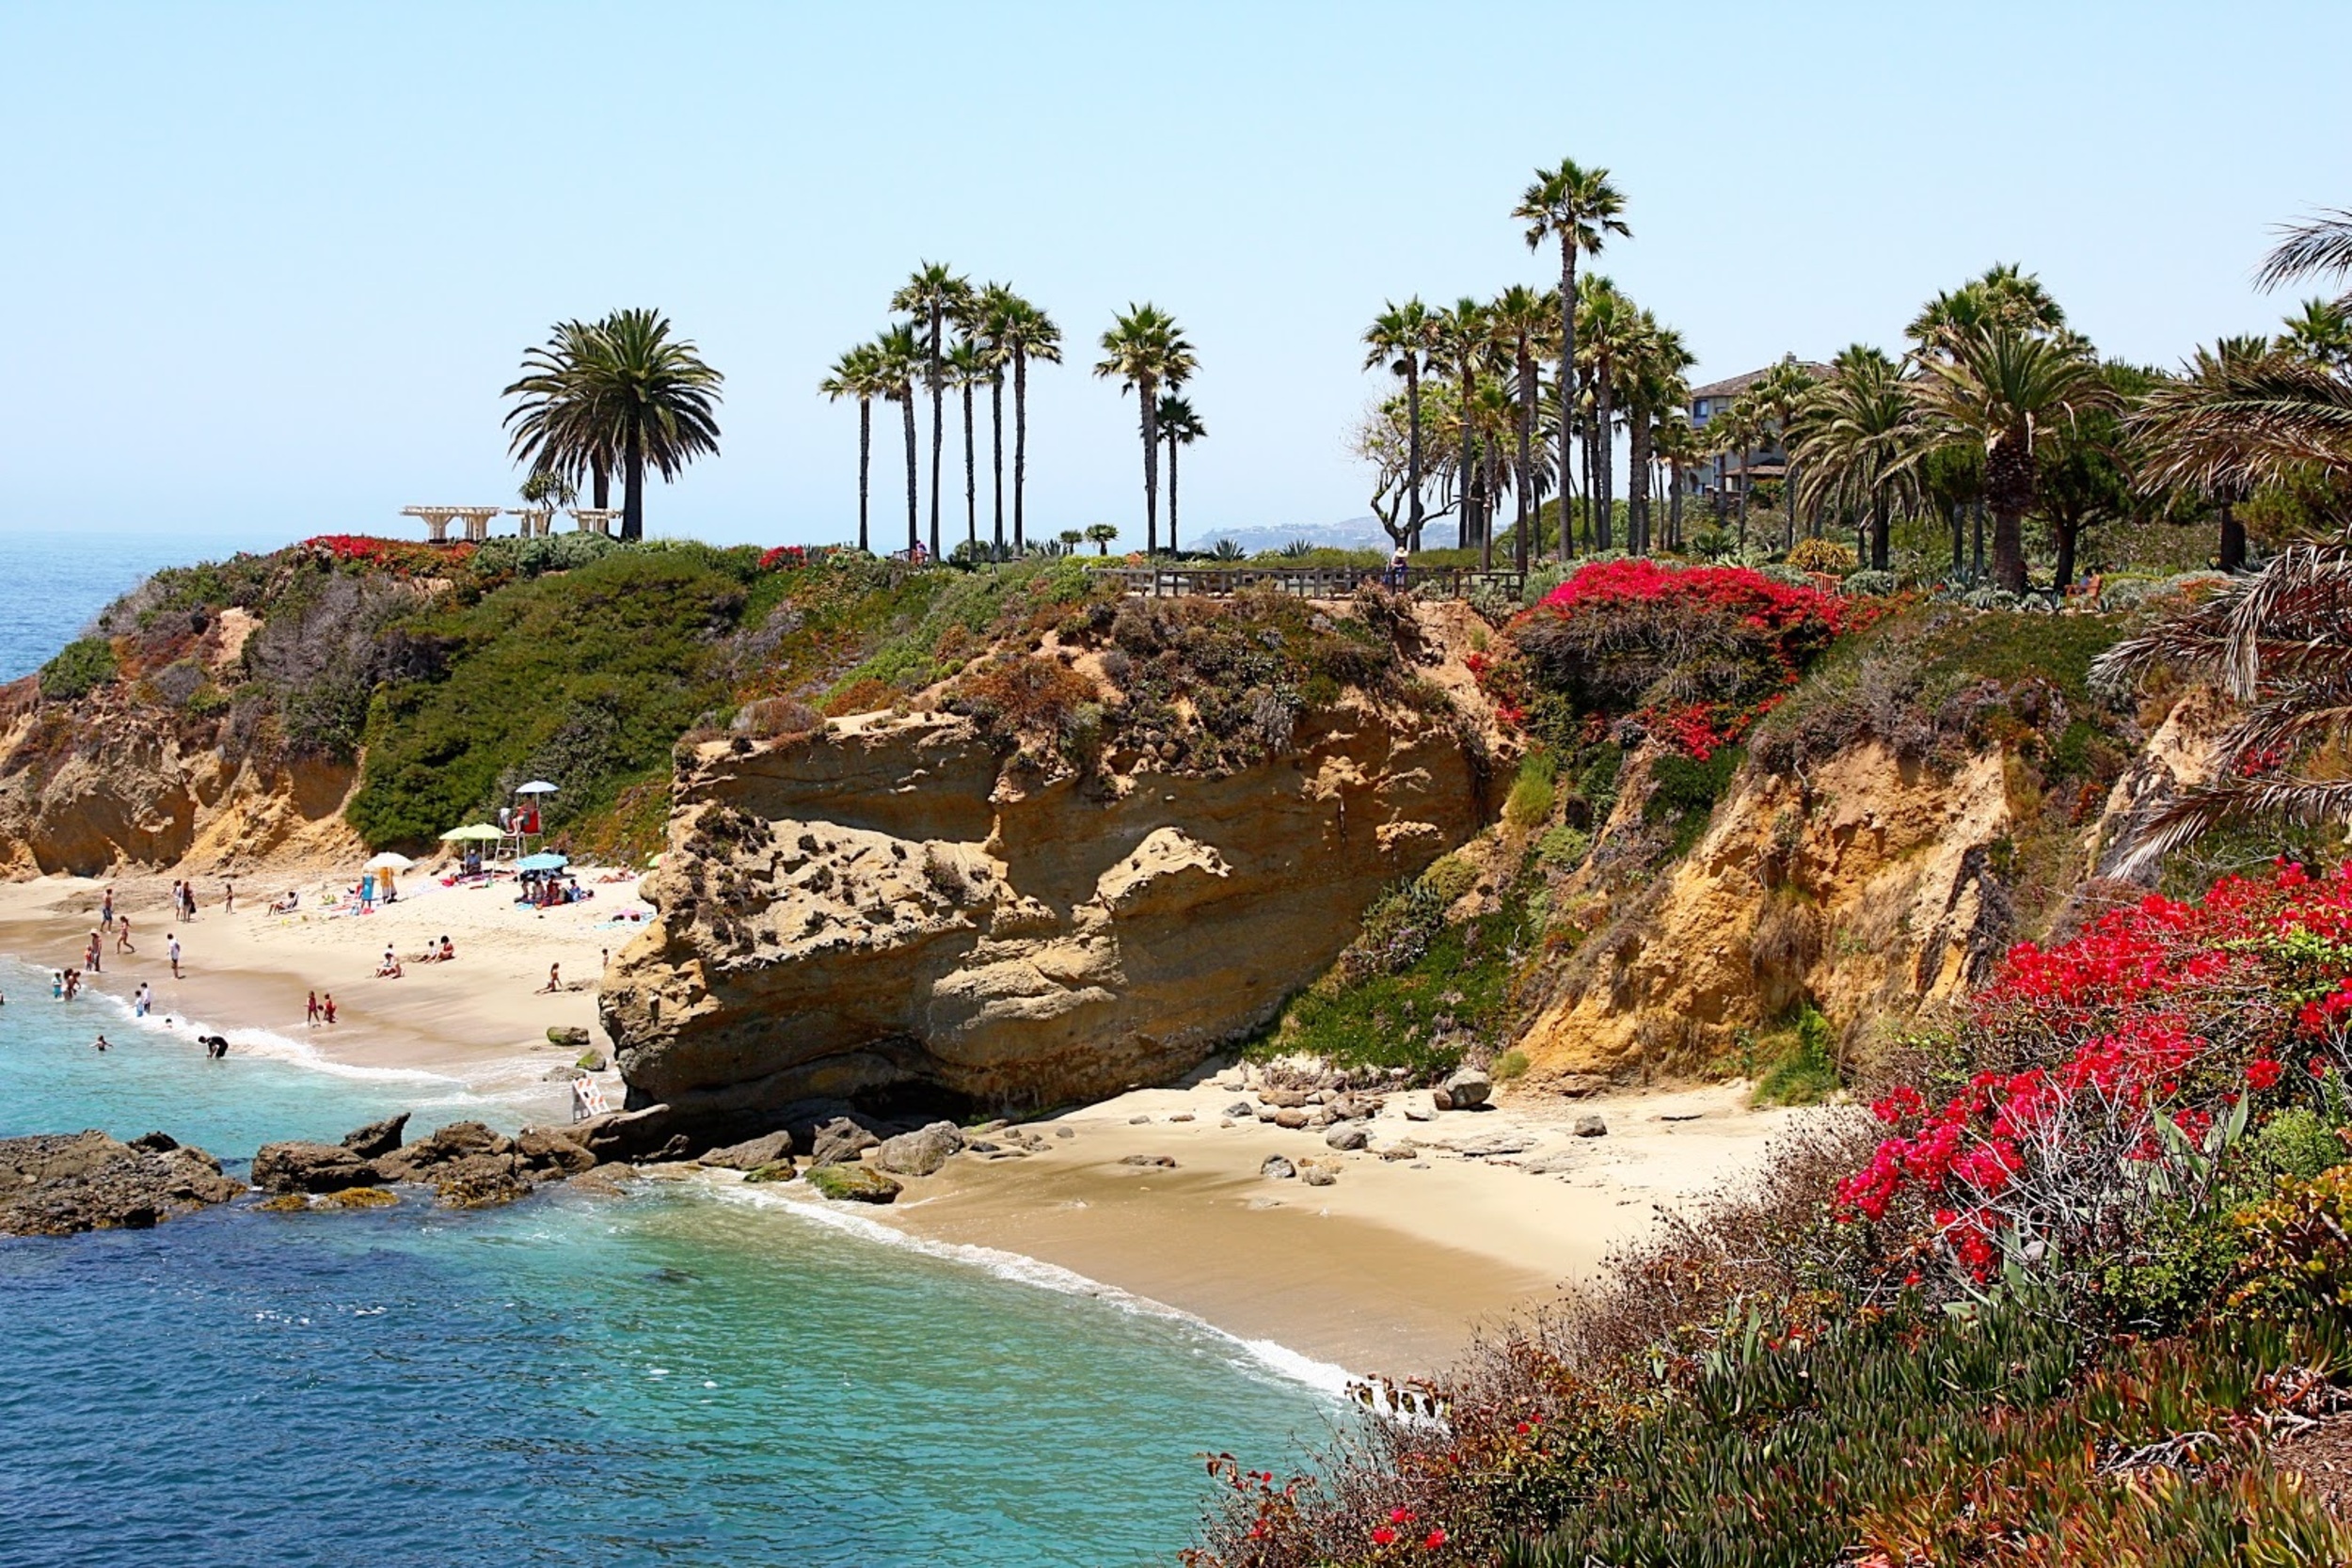 <p>From street level, it's easy to walk right past Treasure Island Beach. Most people walk south to Aliso Beach, but stay north to enjoy one of the most scenic spots in SoCal. </p><p>You may also like: <a href='https://www.yardbarker.com/lifestyle/articles/out_cold_20_foods_you_shouldnt_refrigerate_110823/s1__34562840'>Out cold: 20 foods you shouldn't refrigerate</a></p>